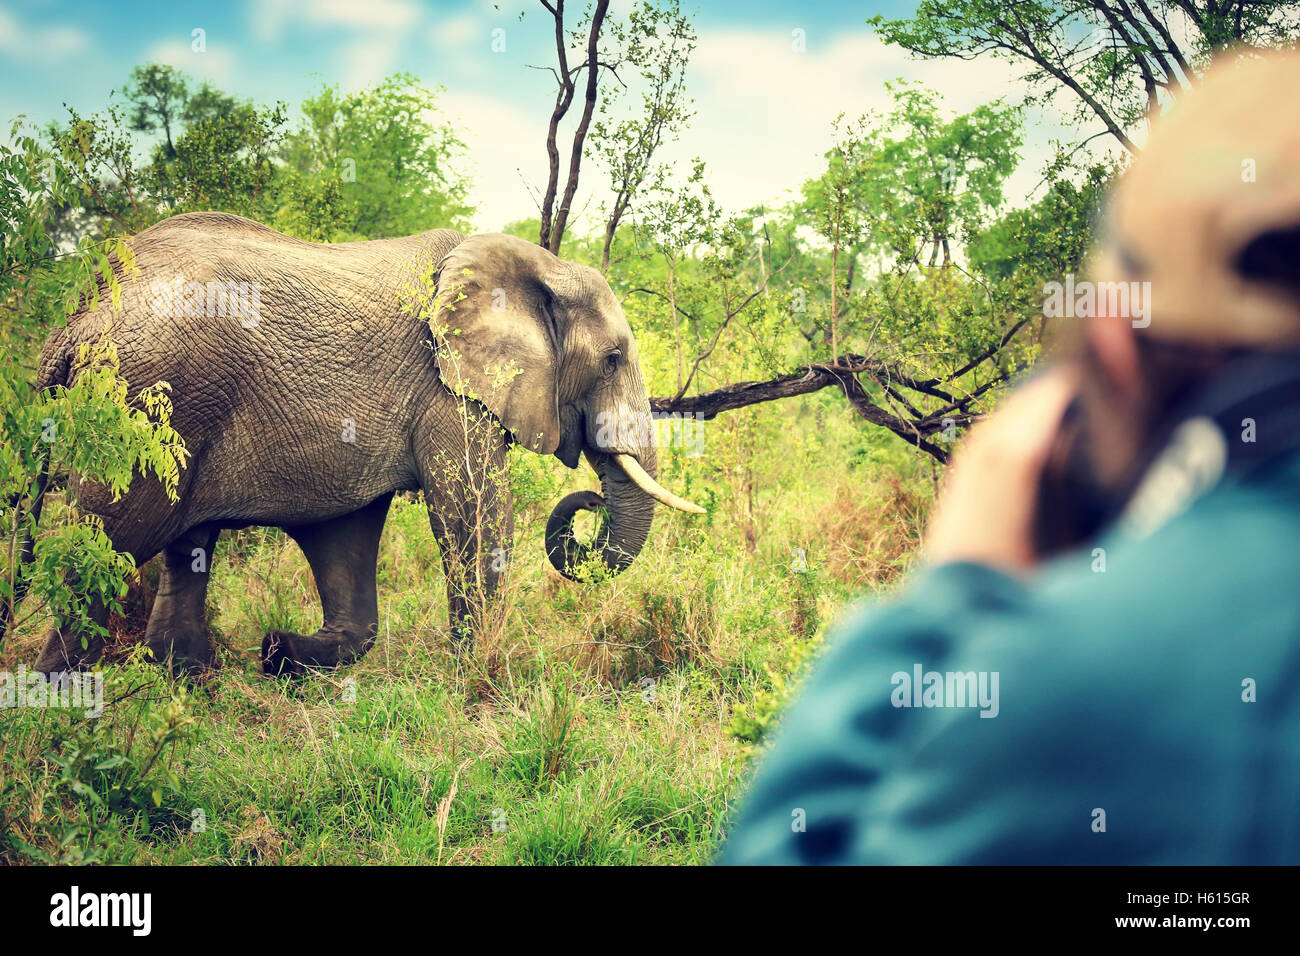 Photographer taking pictures of an African elephants, wild animal, safari game drive, Eco travel and tourism Stock Photo